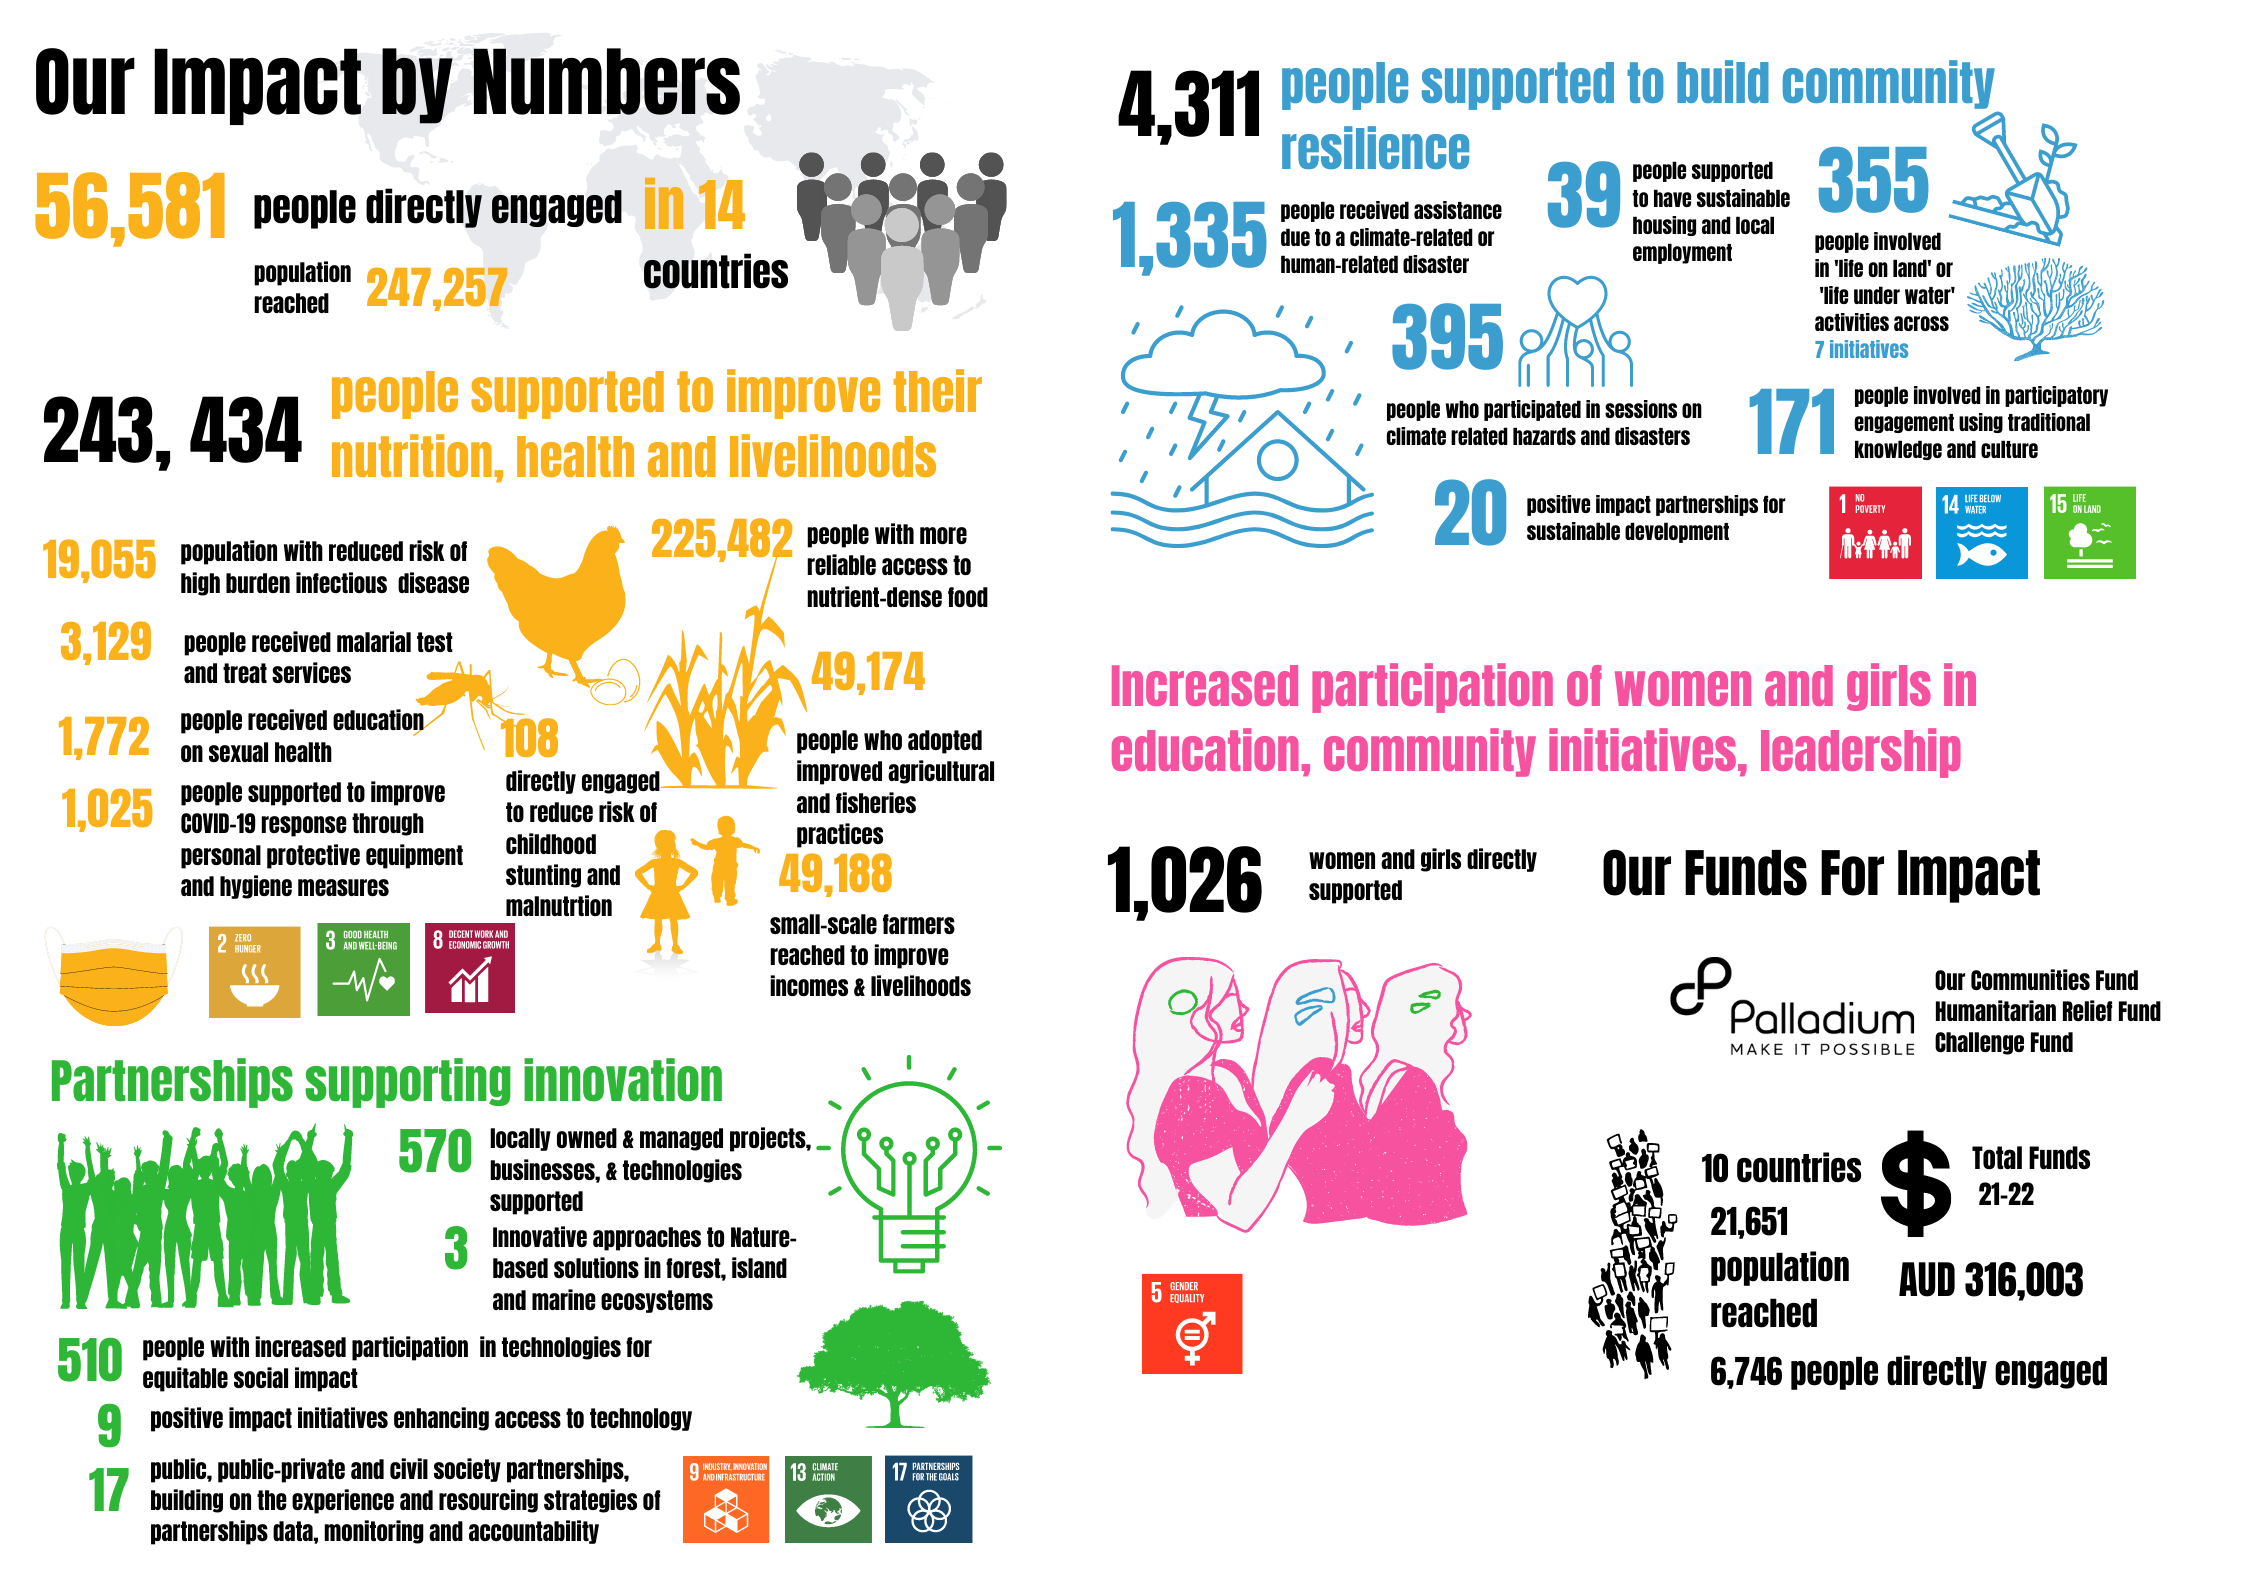 Our Impact by Numbers Infographic 21-22